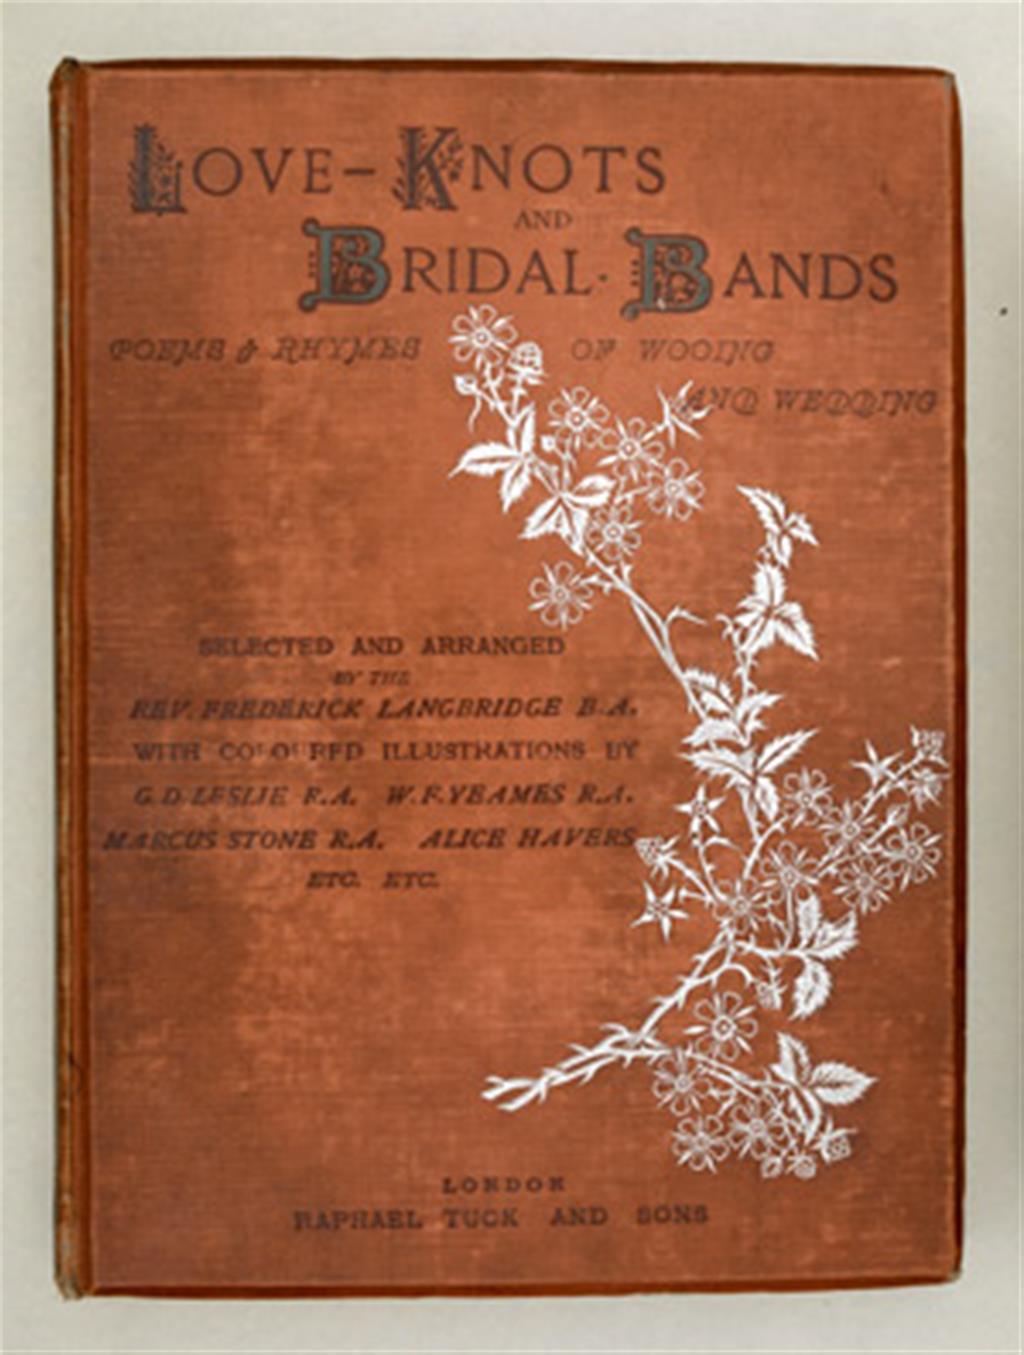 Love-Knots and Bridal-Bands: Poems and Rhymes of Wooing and Wedding cover image